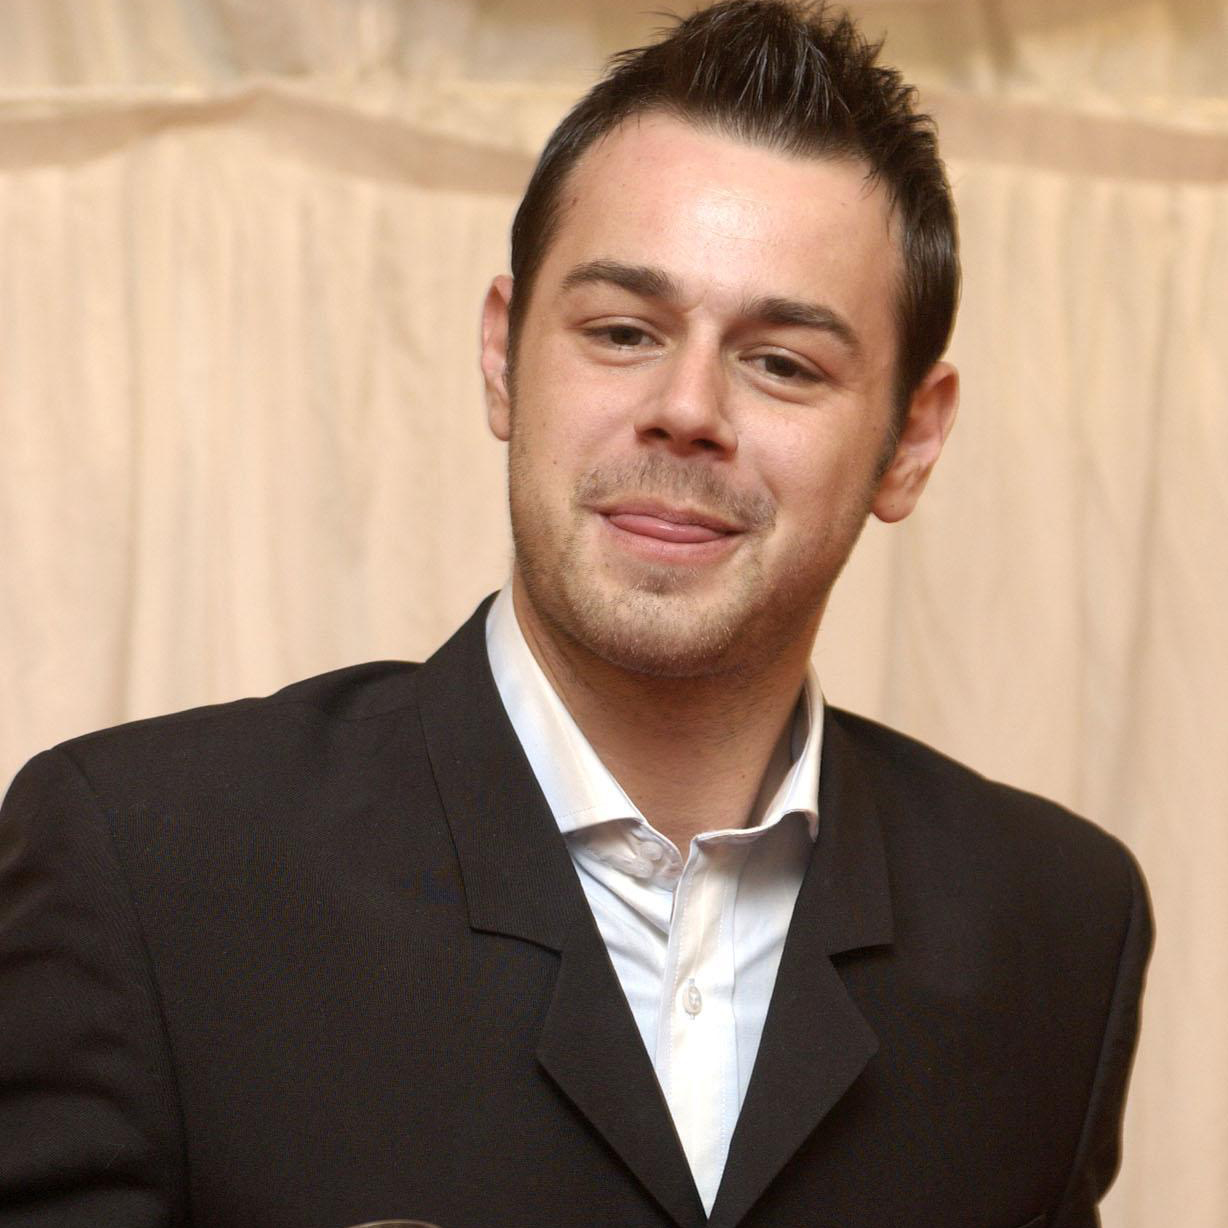 Gallery Photos of "Danny Dyer" .